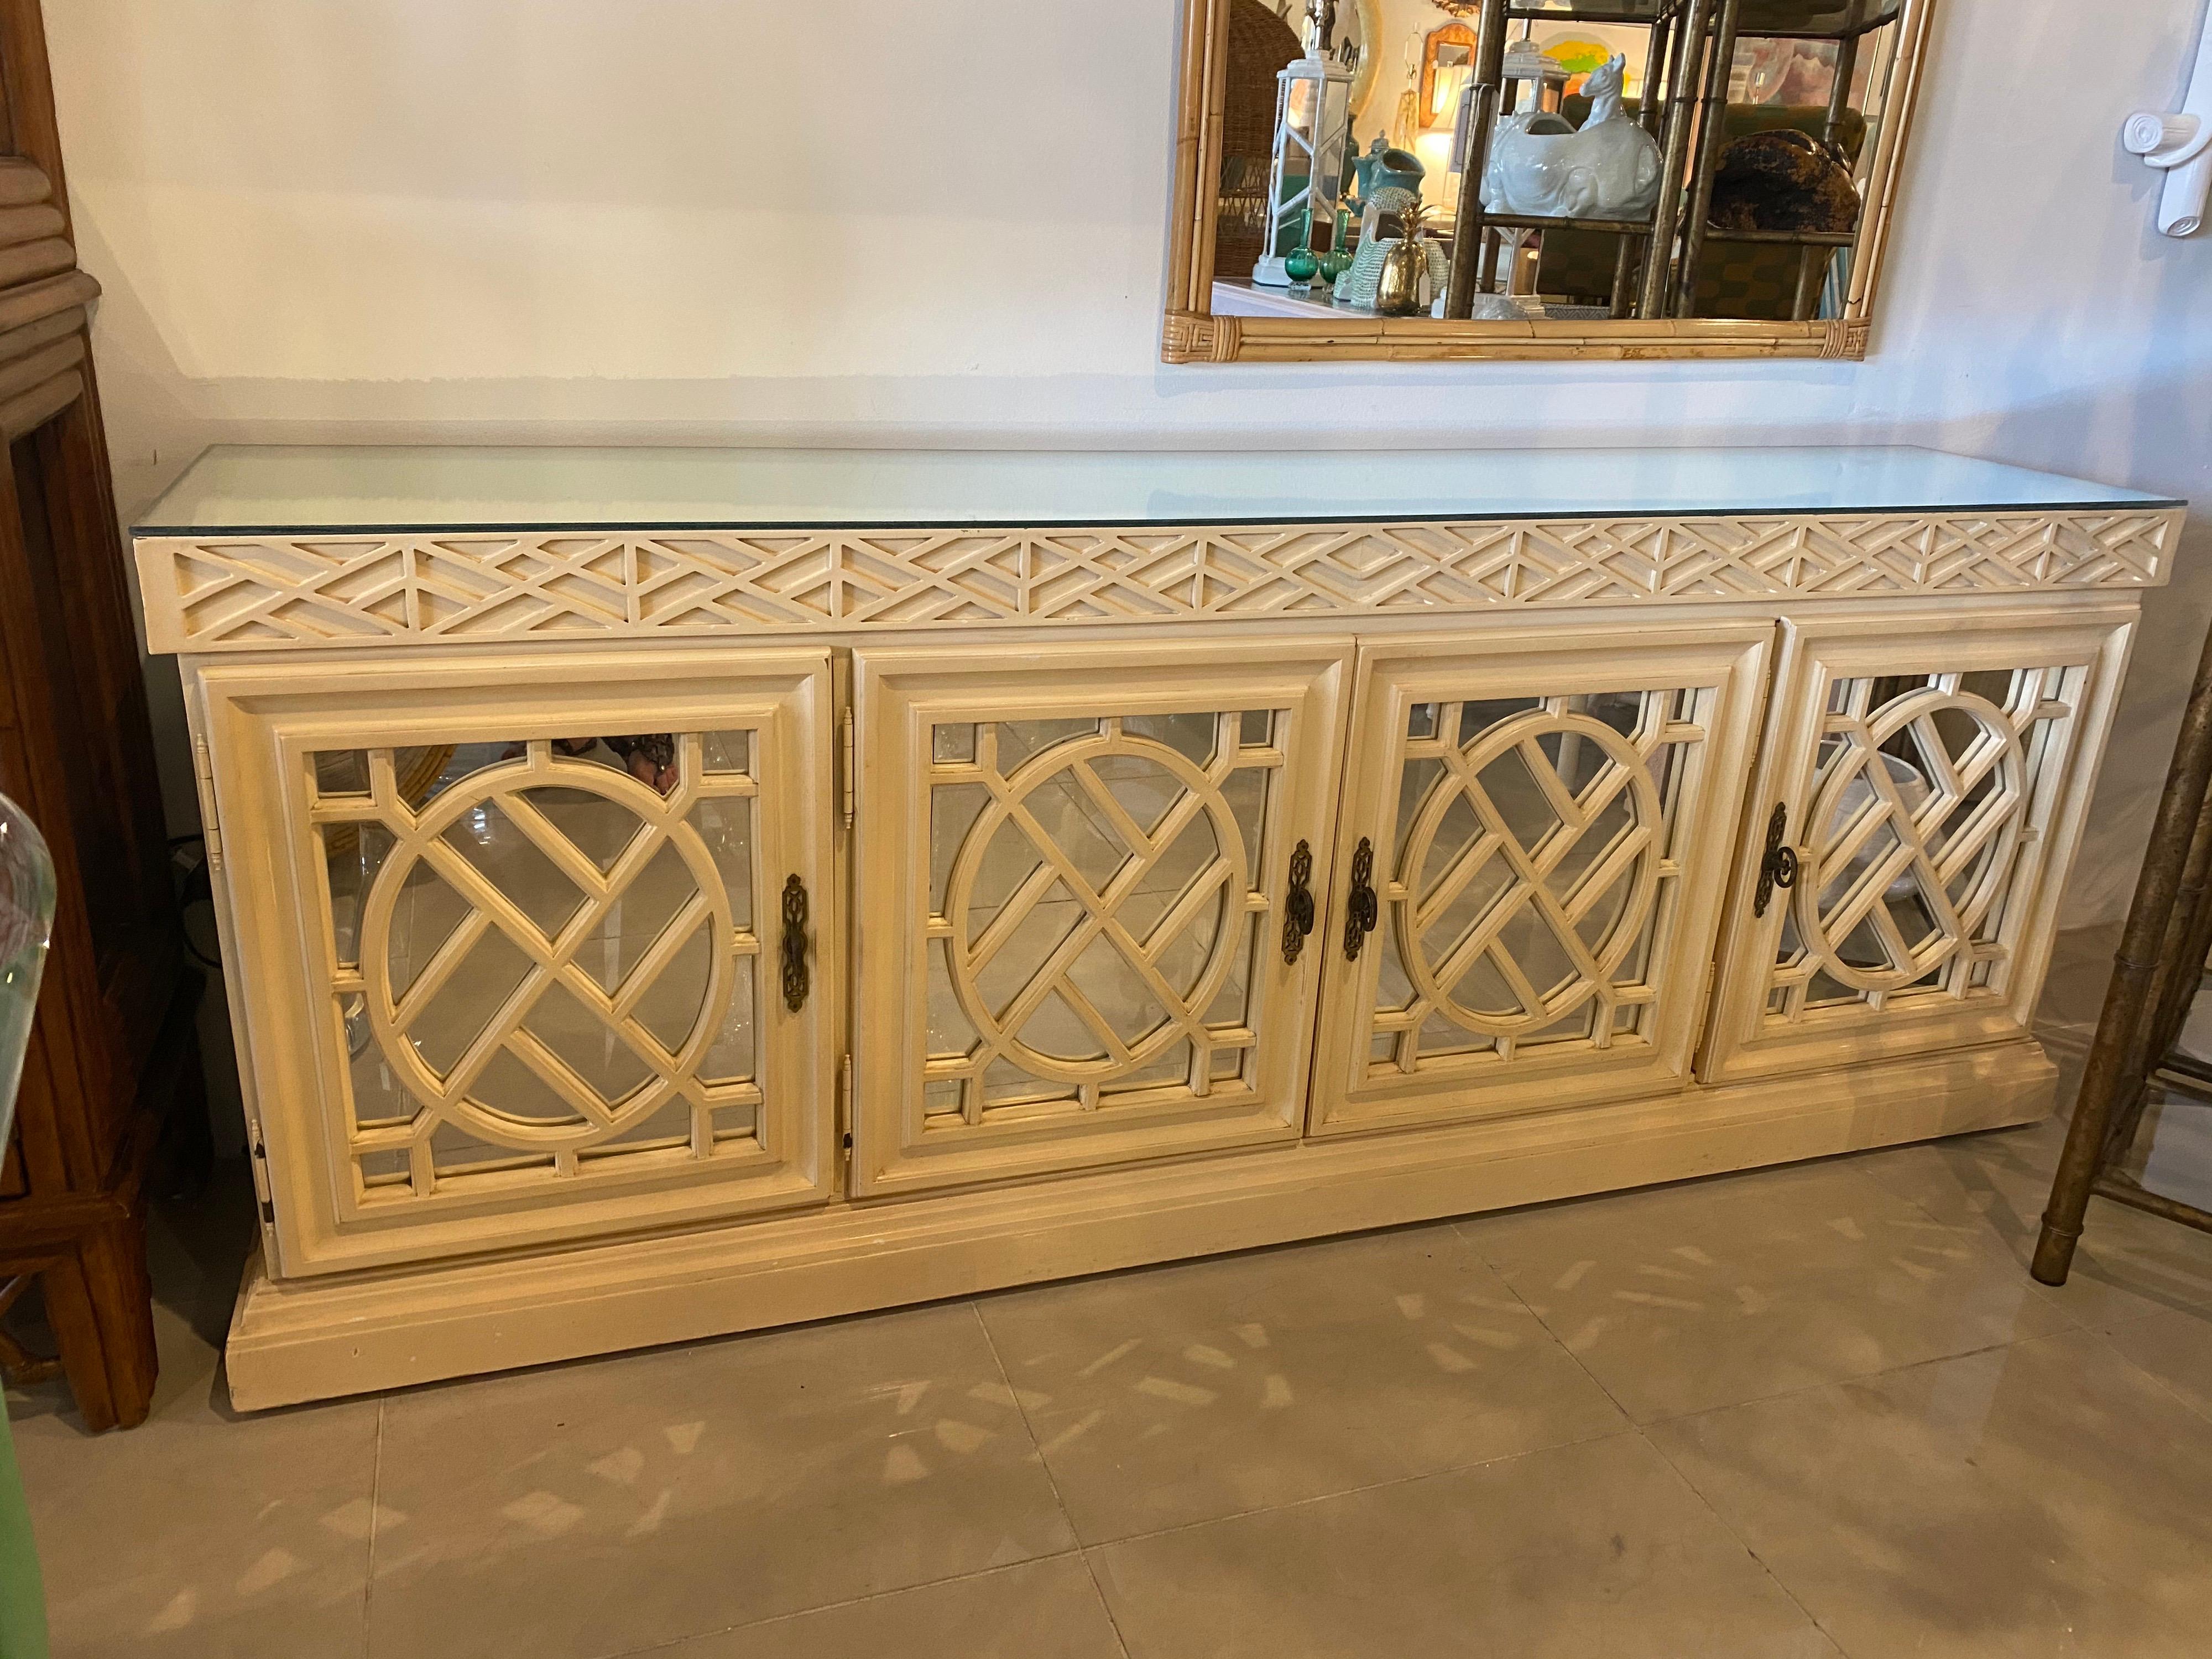 Late 20th Century Vintage Fretwork Fret Work Chinese Chippendale Mirrored Credenza Buffet Cabinet